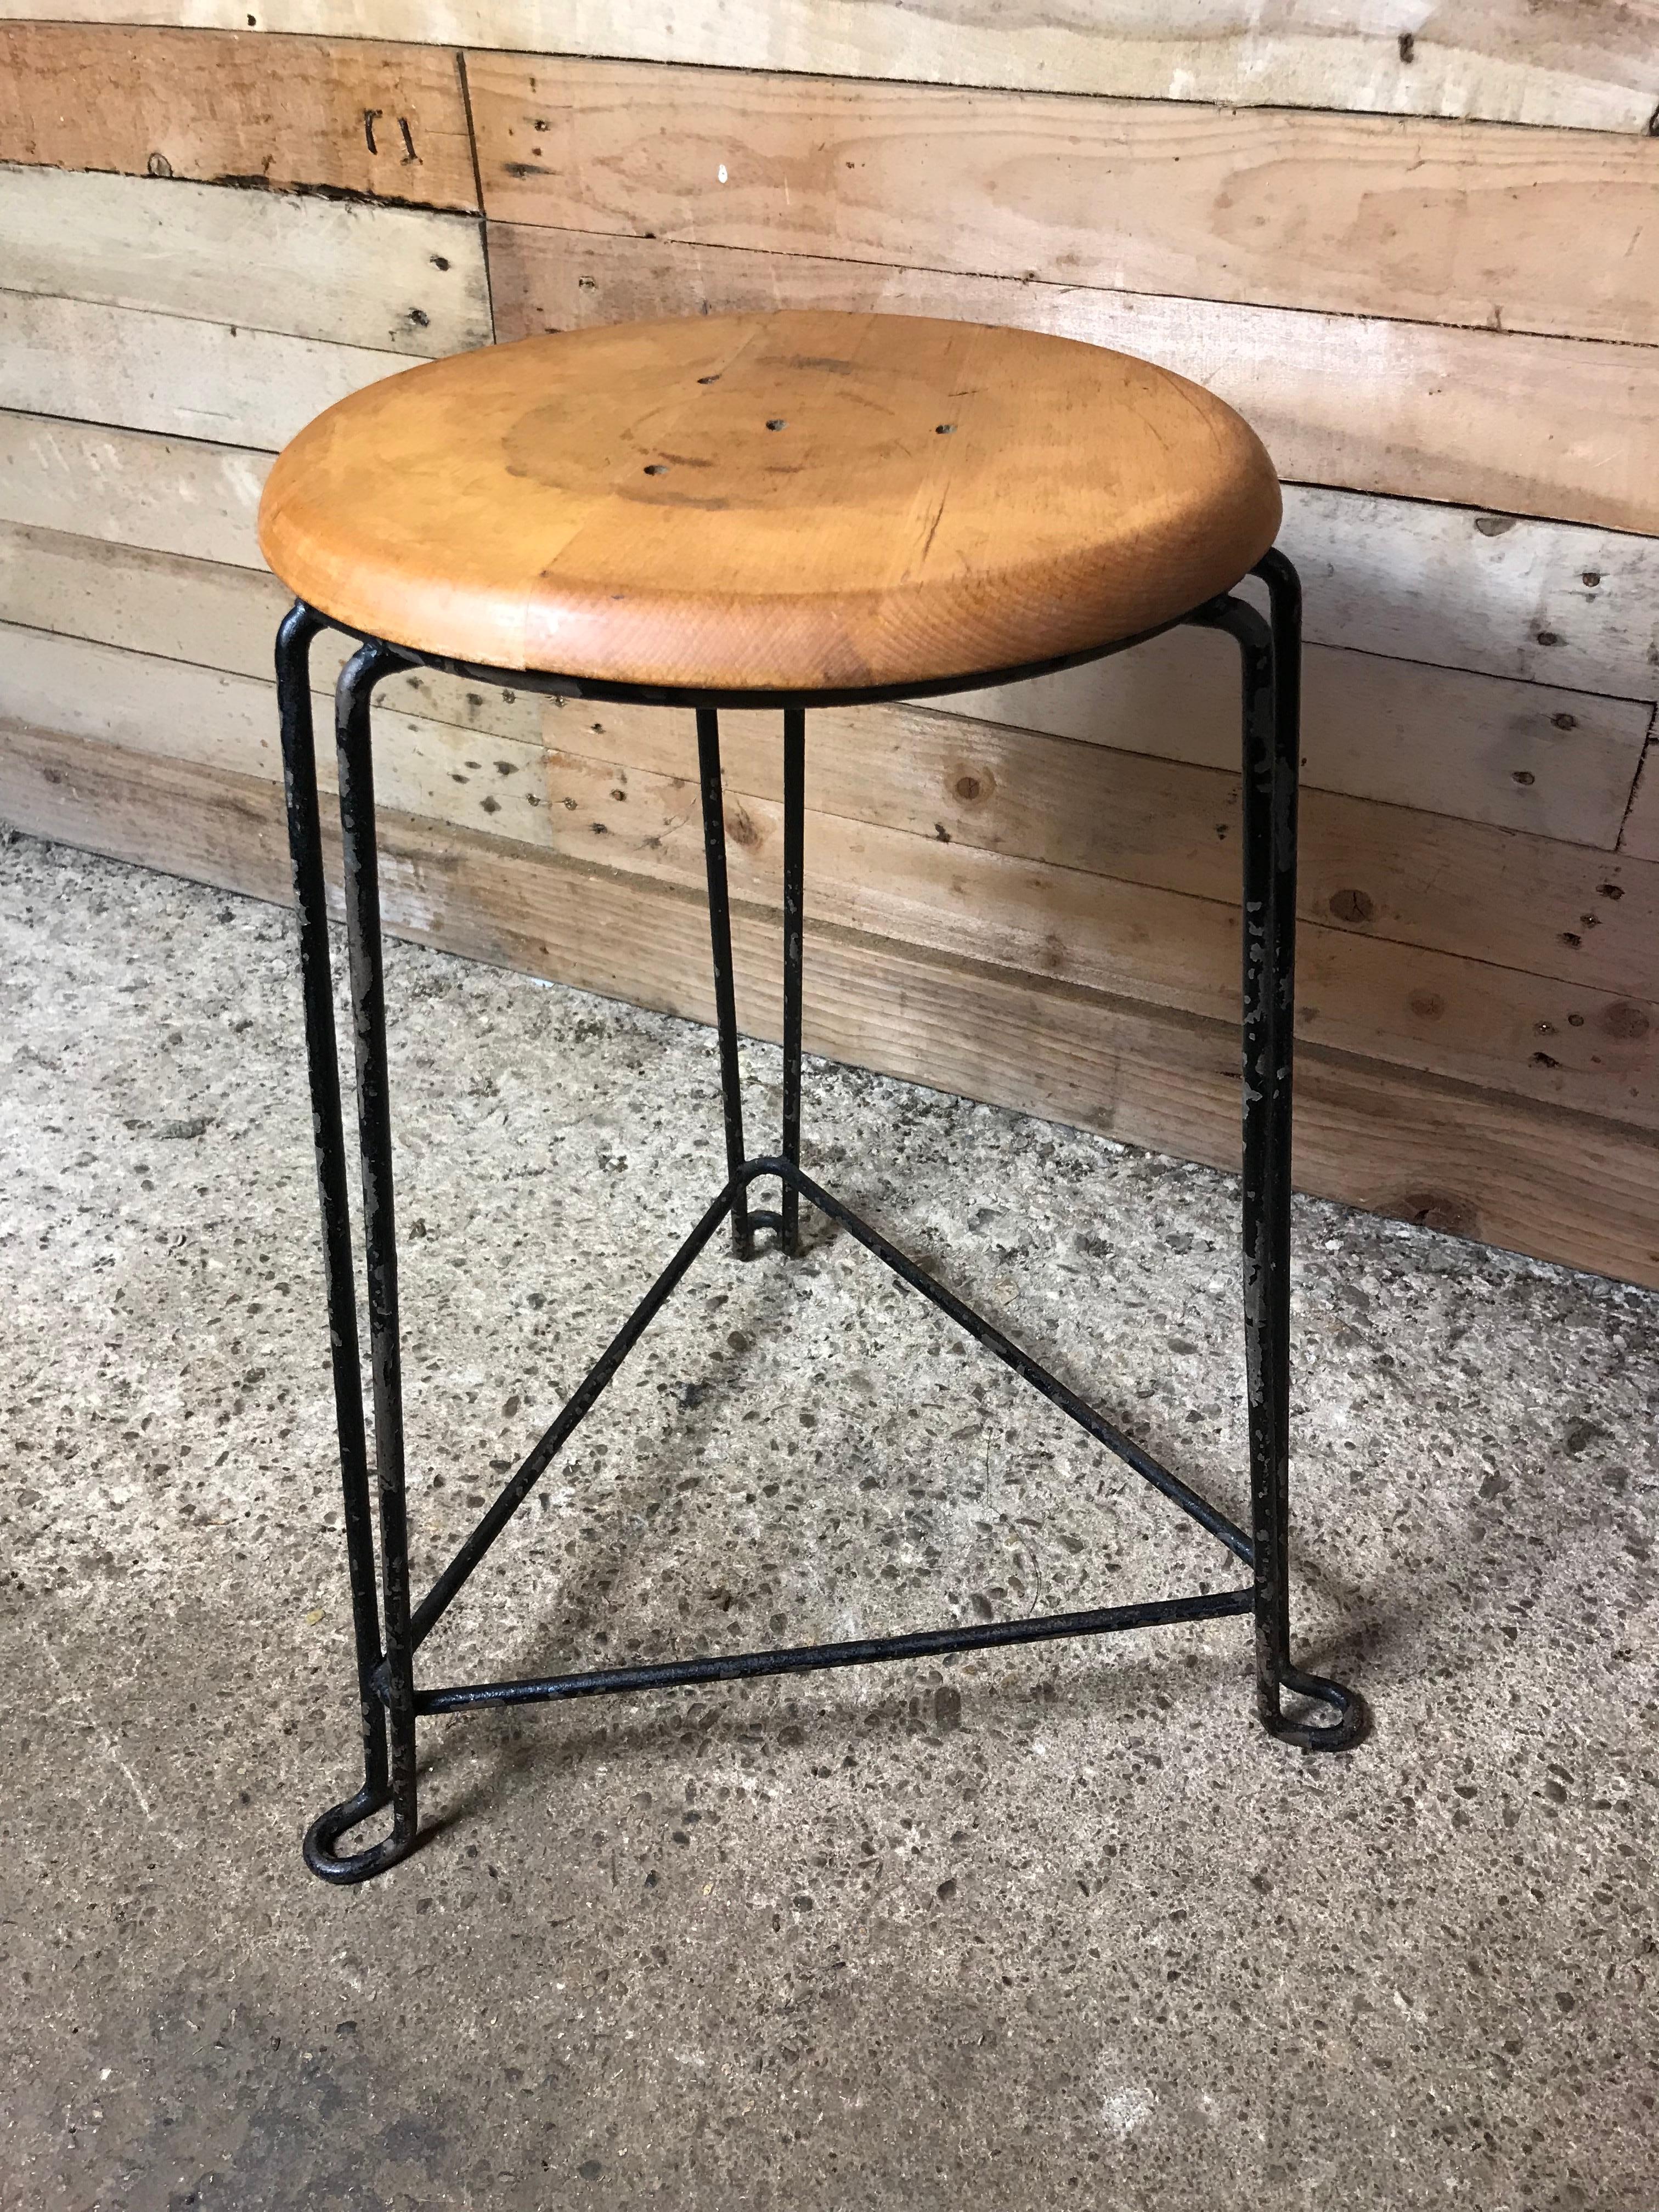 Mid-Century Modern Retro 1960s Wooden Seat with Metal Frame Tomado Stool 'Clear Wooden Seat' For Sale